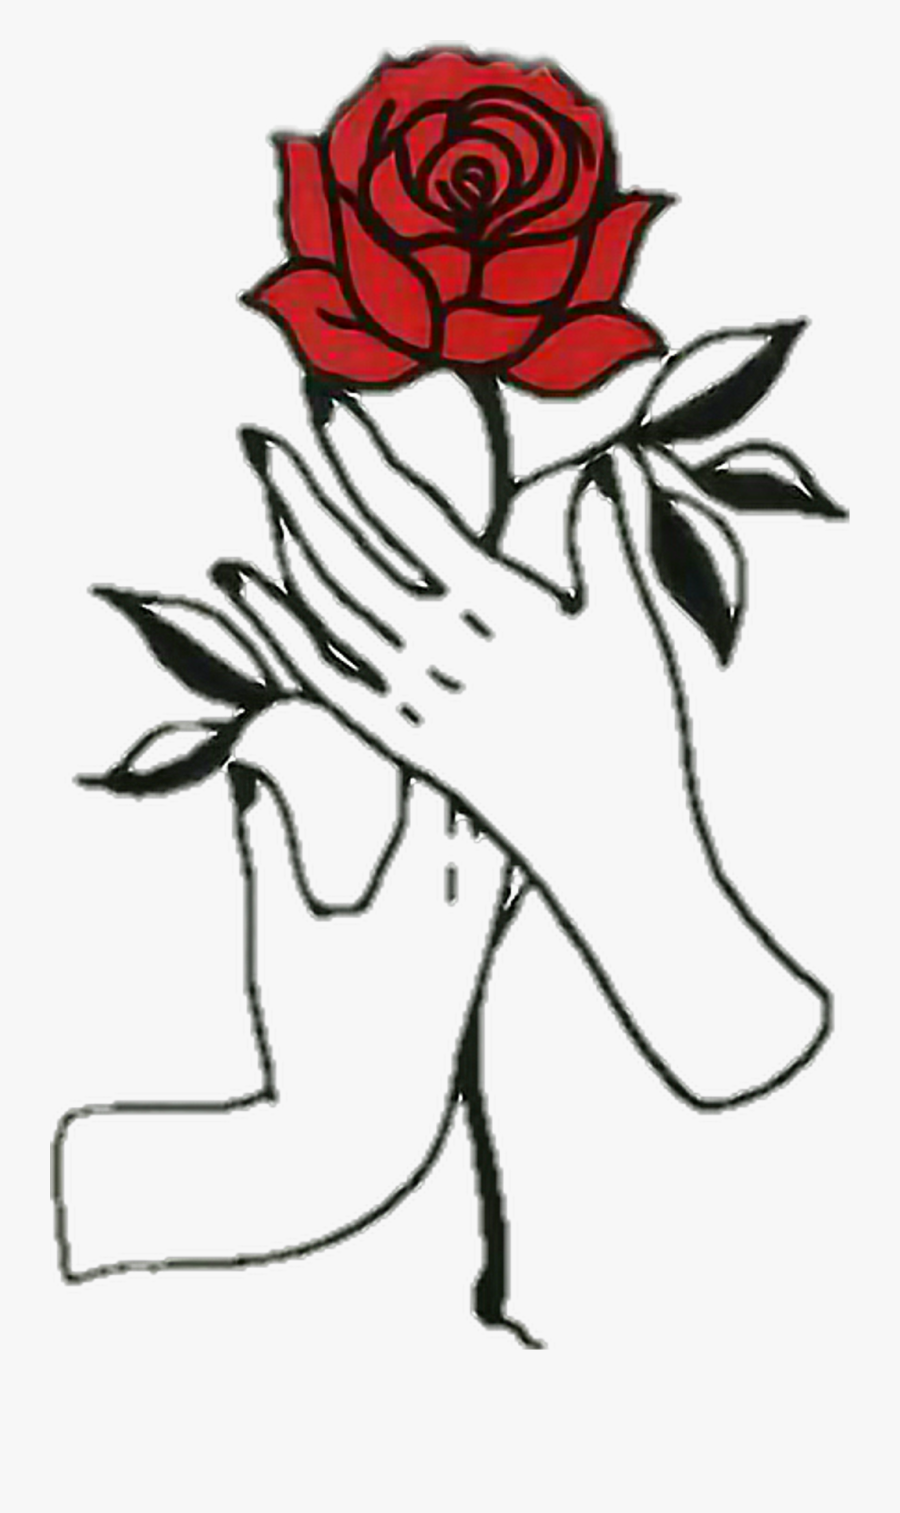 Rose Hands Aesthetic Tumblr Draw - Aesthetic Tumblr Rose Png, Transparent Clipart